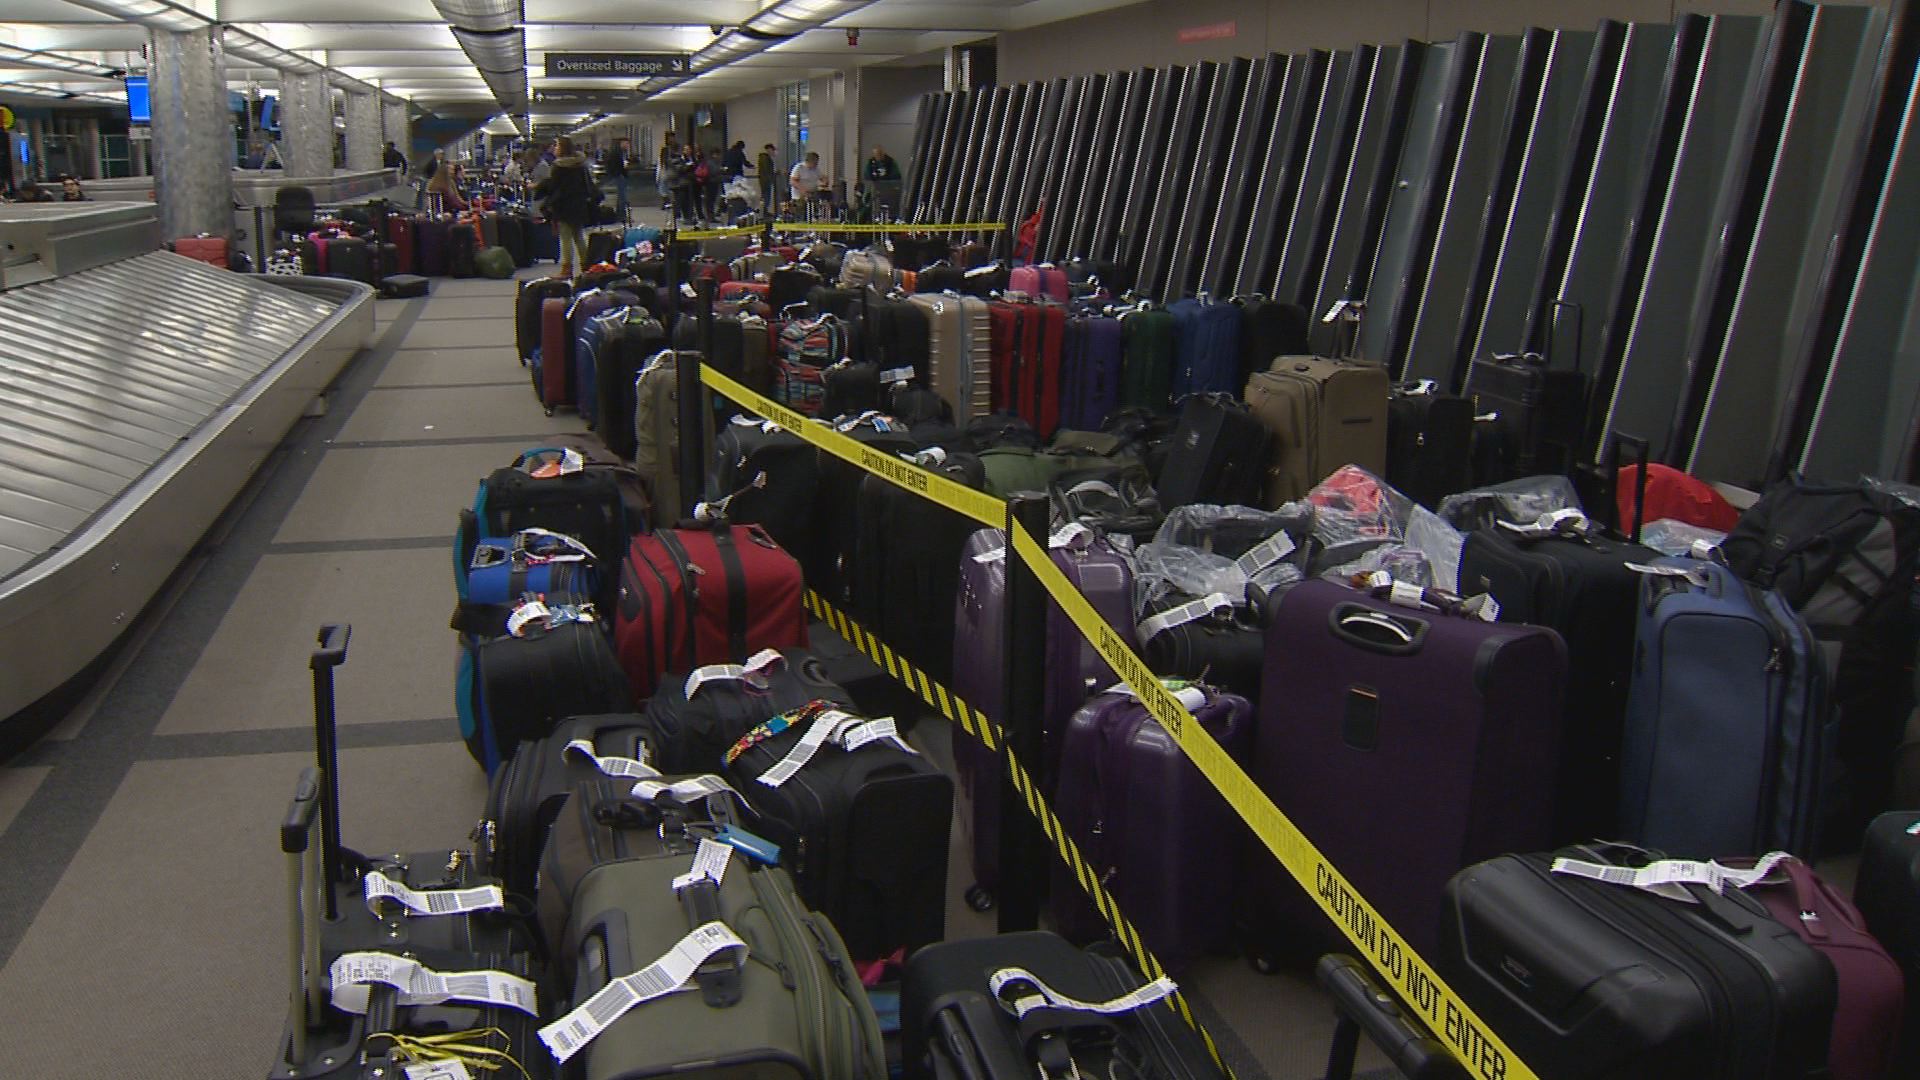 Bags still piled up after Frontier mess at DIA | 9news.com